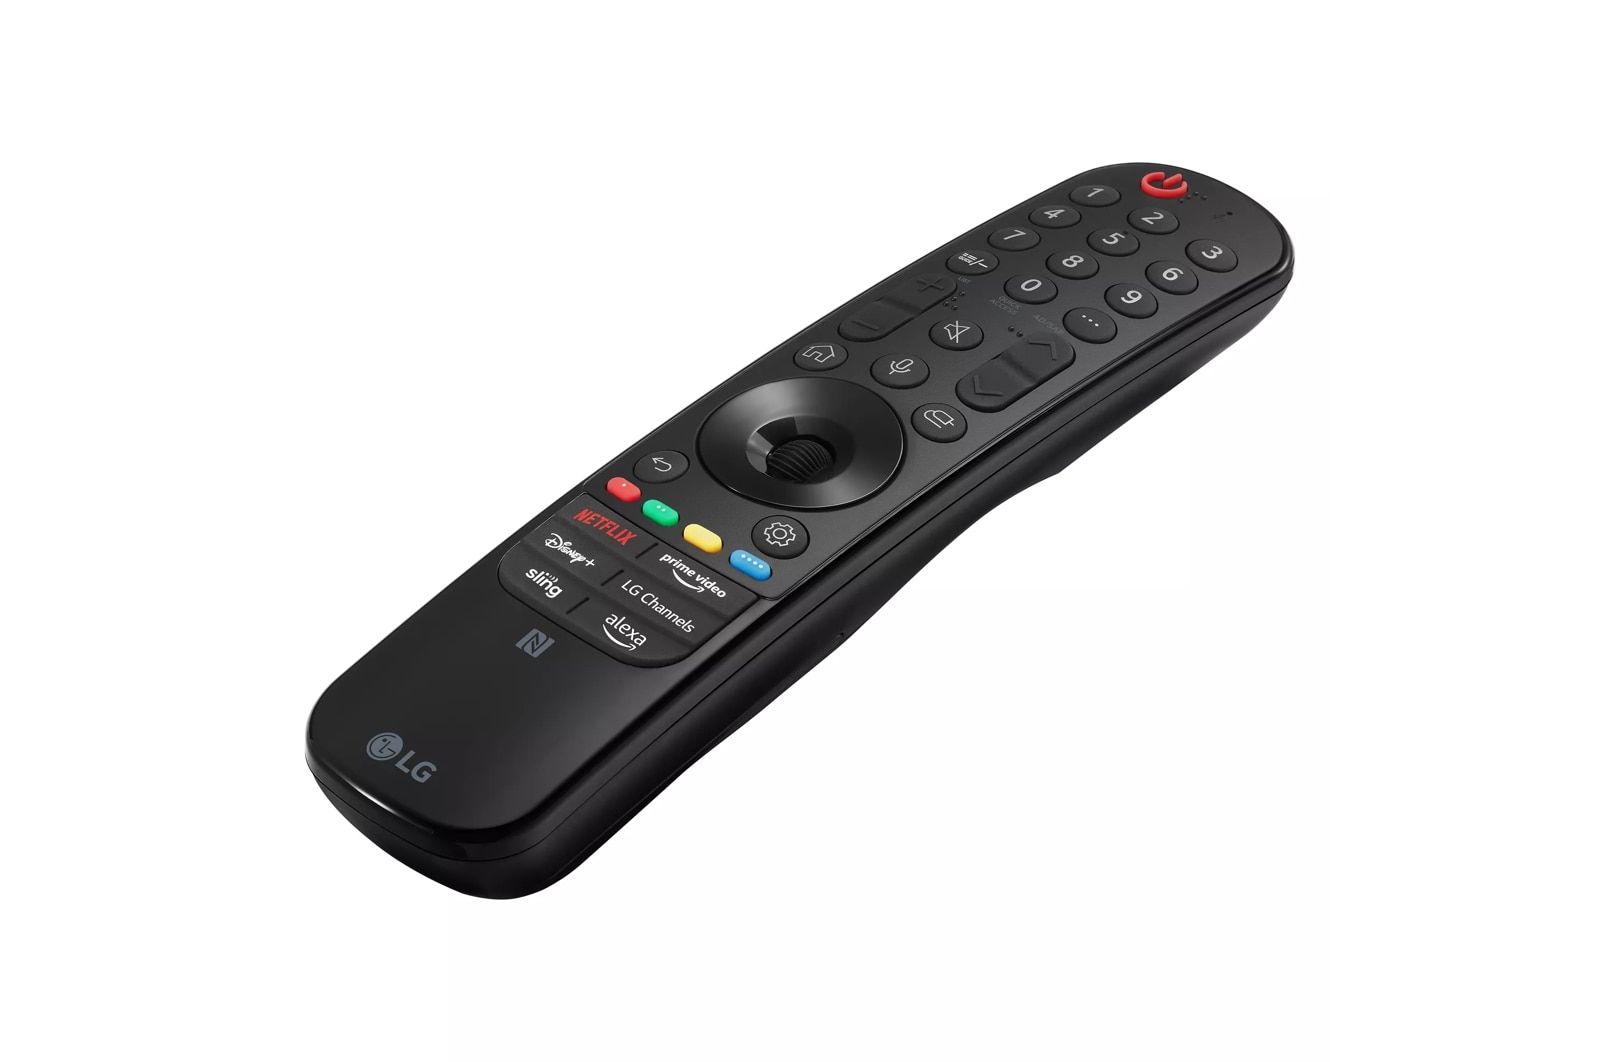 Magic Remote Control for Select 2018 LG TVs - AN-MR18BA